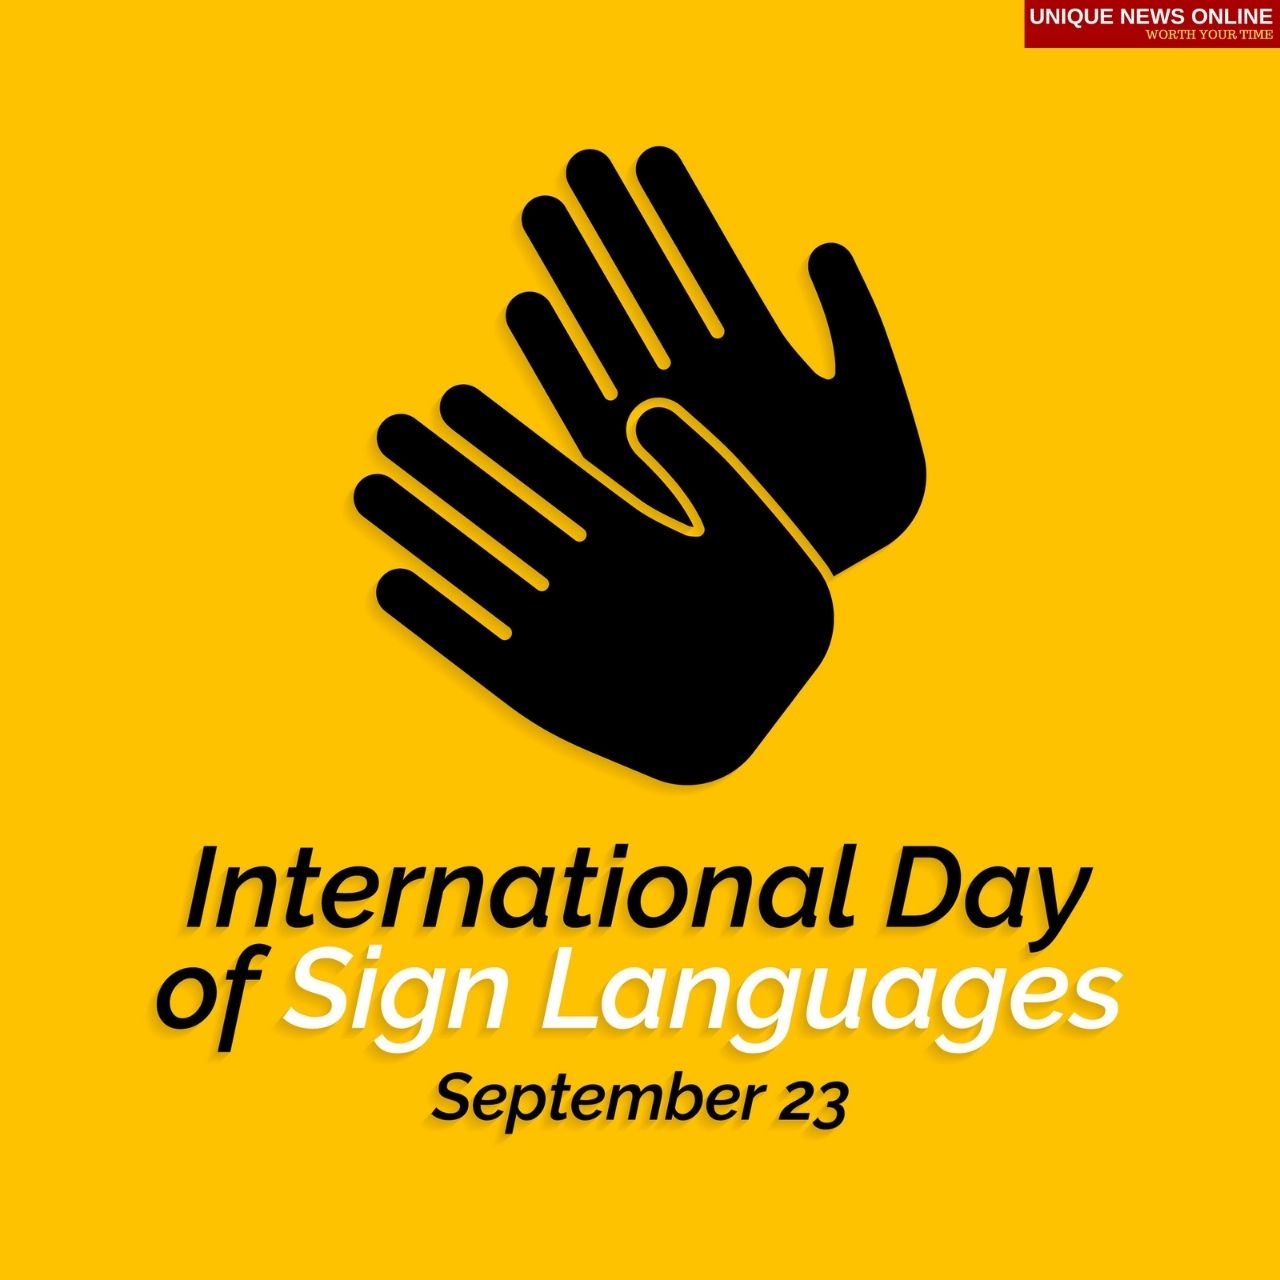 International Day of Sign Languages 2021 Theme, Quotes, Images, Poster, and Messages to Share